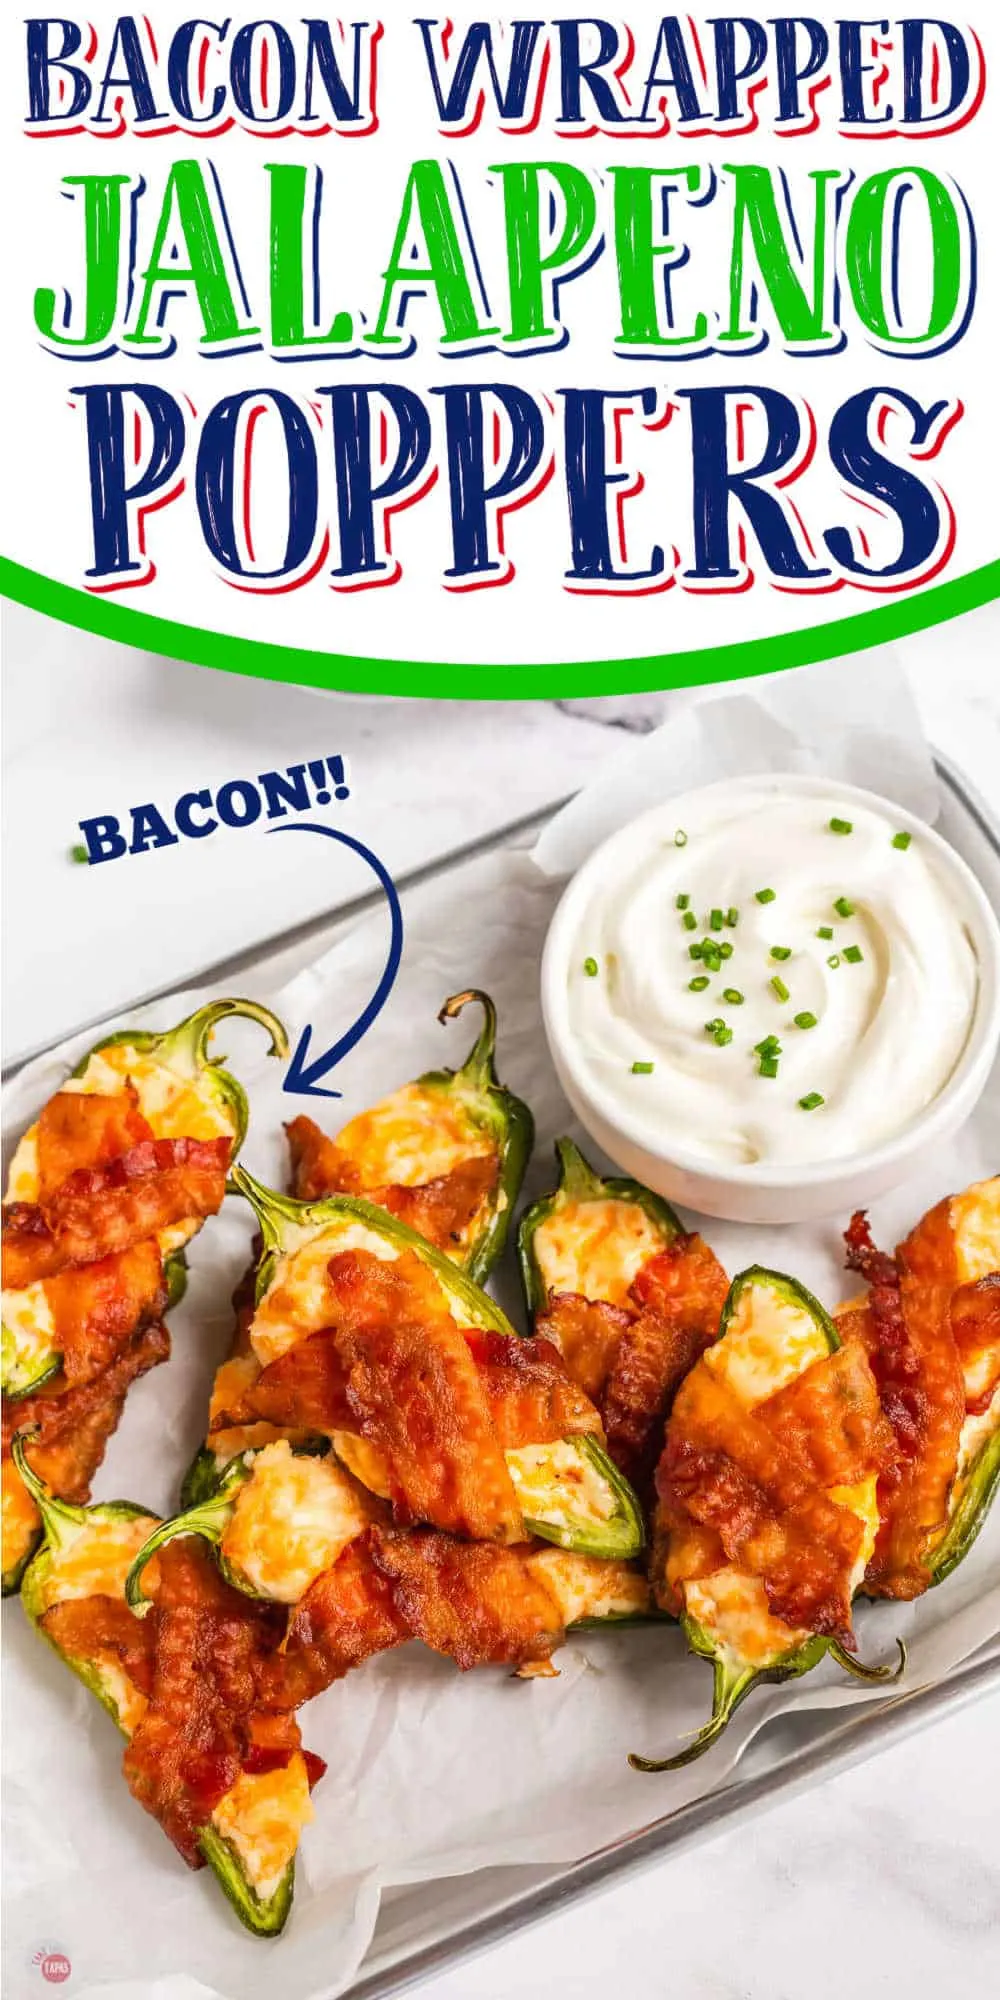 jalapeno poppers and a bowl of sour cream